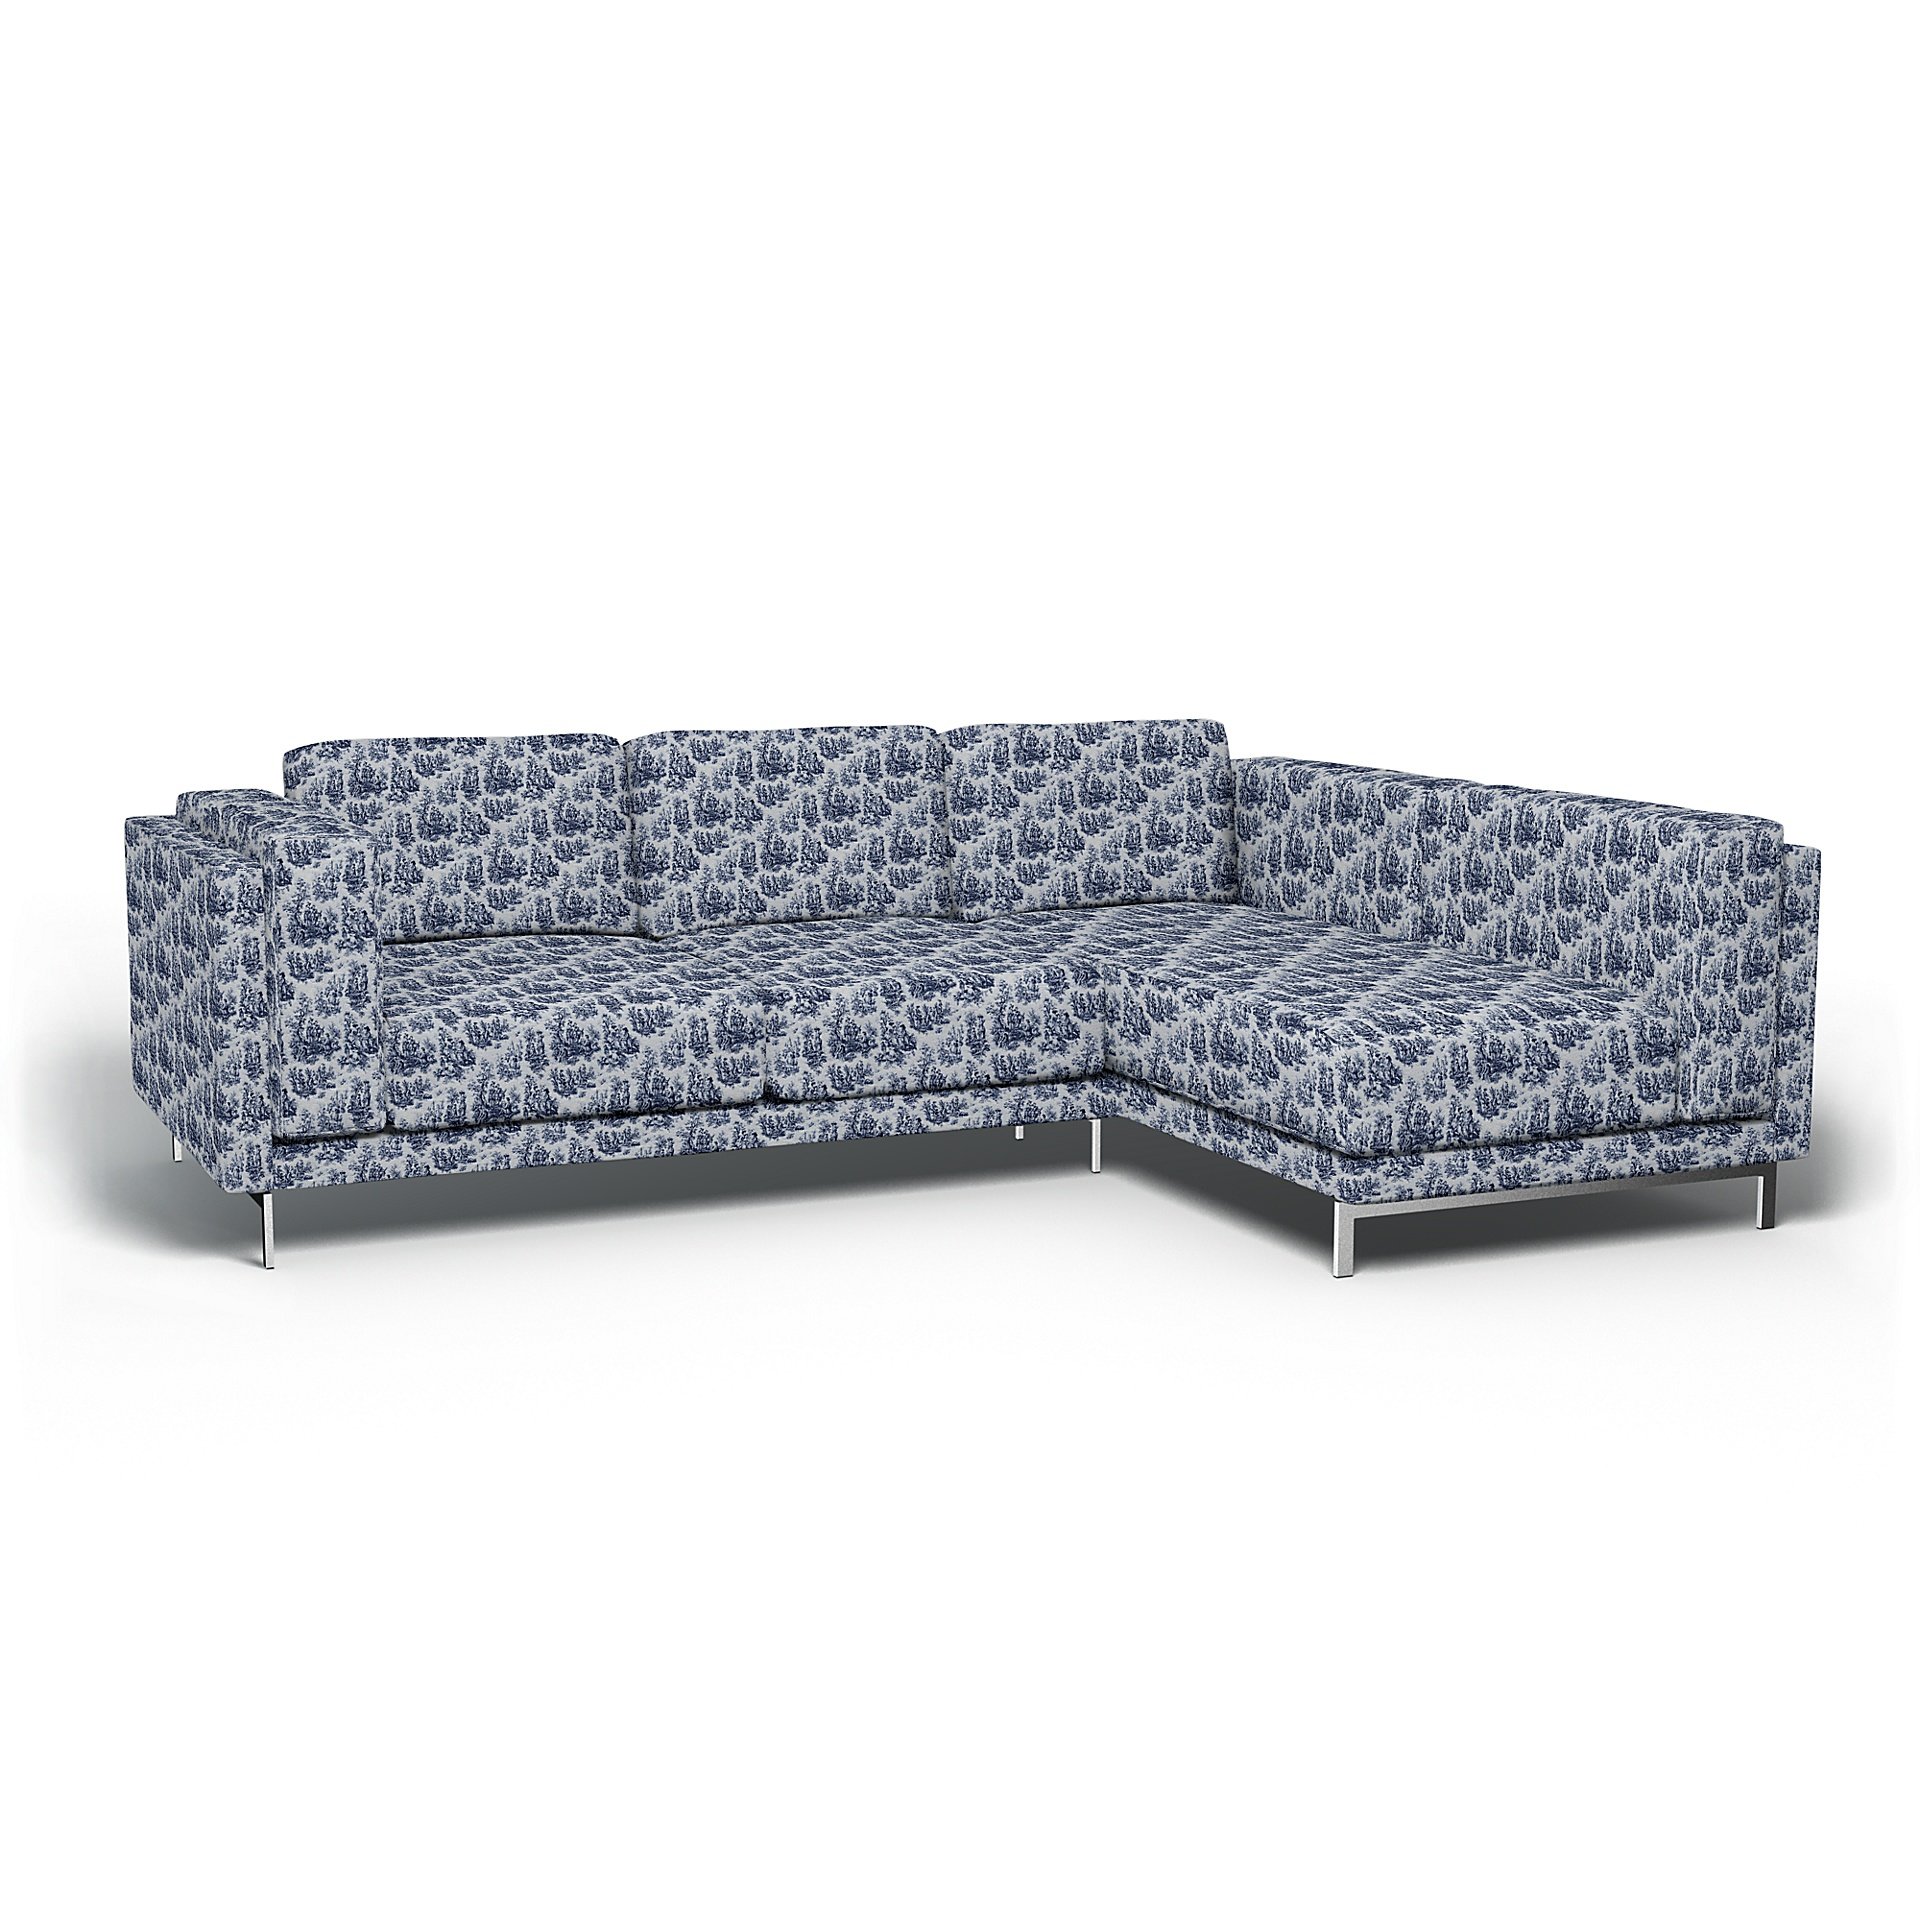 IKEA - Nockeby 3 Seat Sofa with Right Chaise Cover, Dark Blue, Boucle & Texture - Bemz